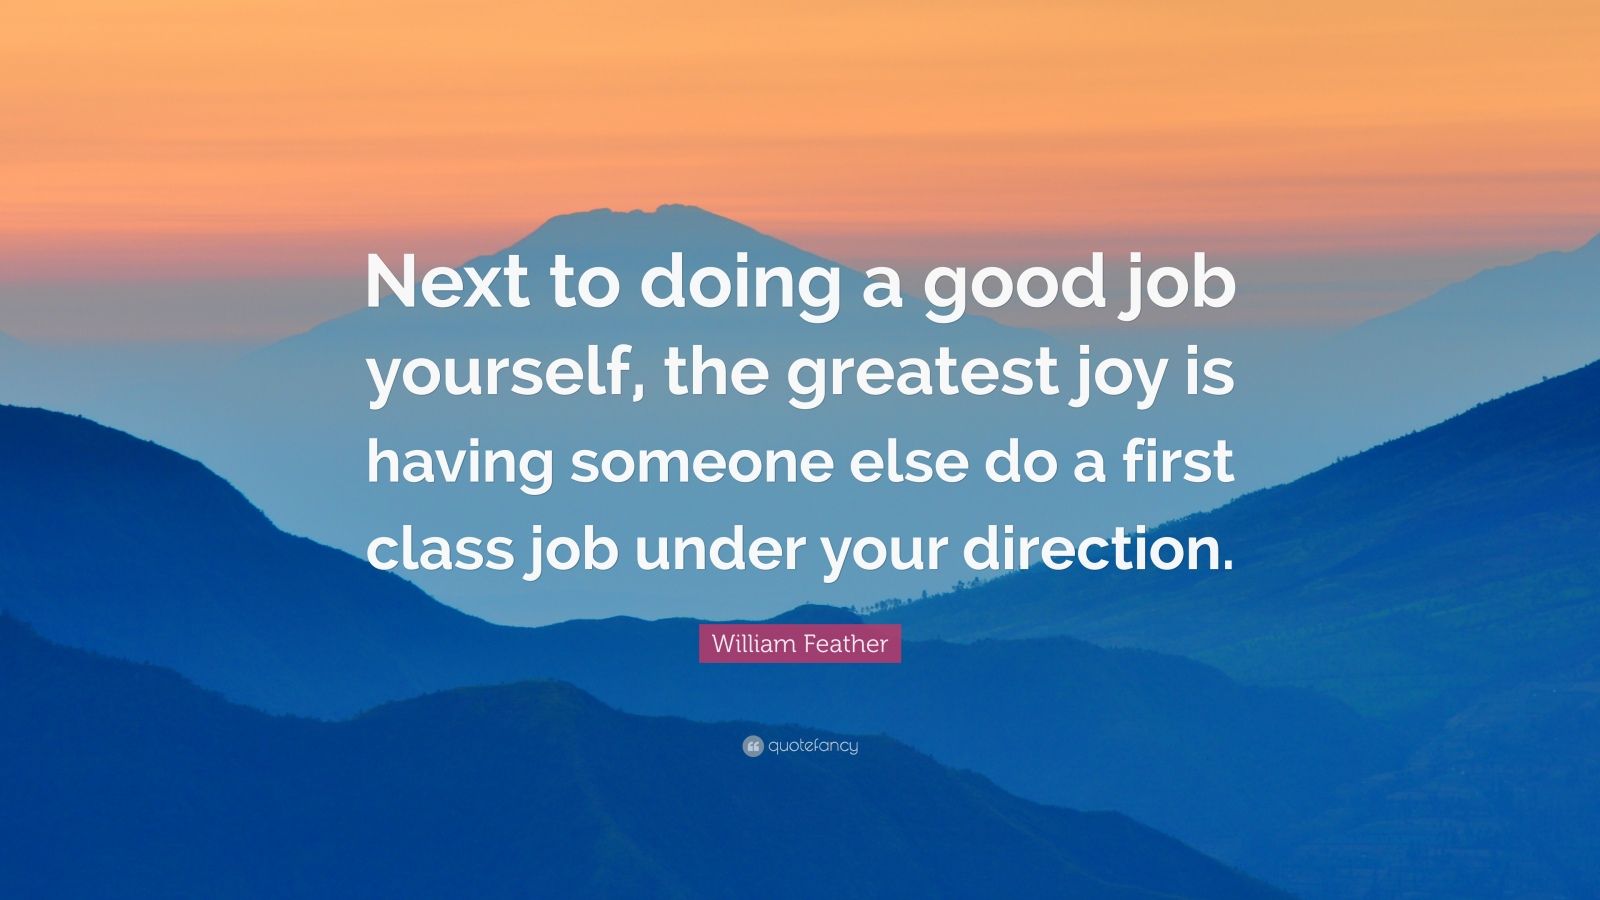 William Feather Quote: “Next to doing a good job yourself, the greatest